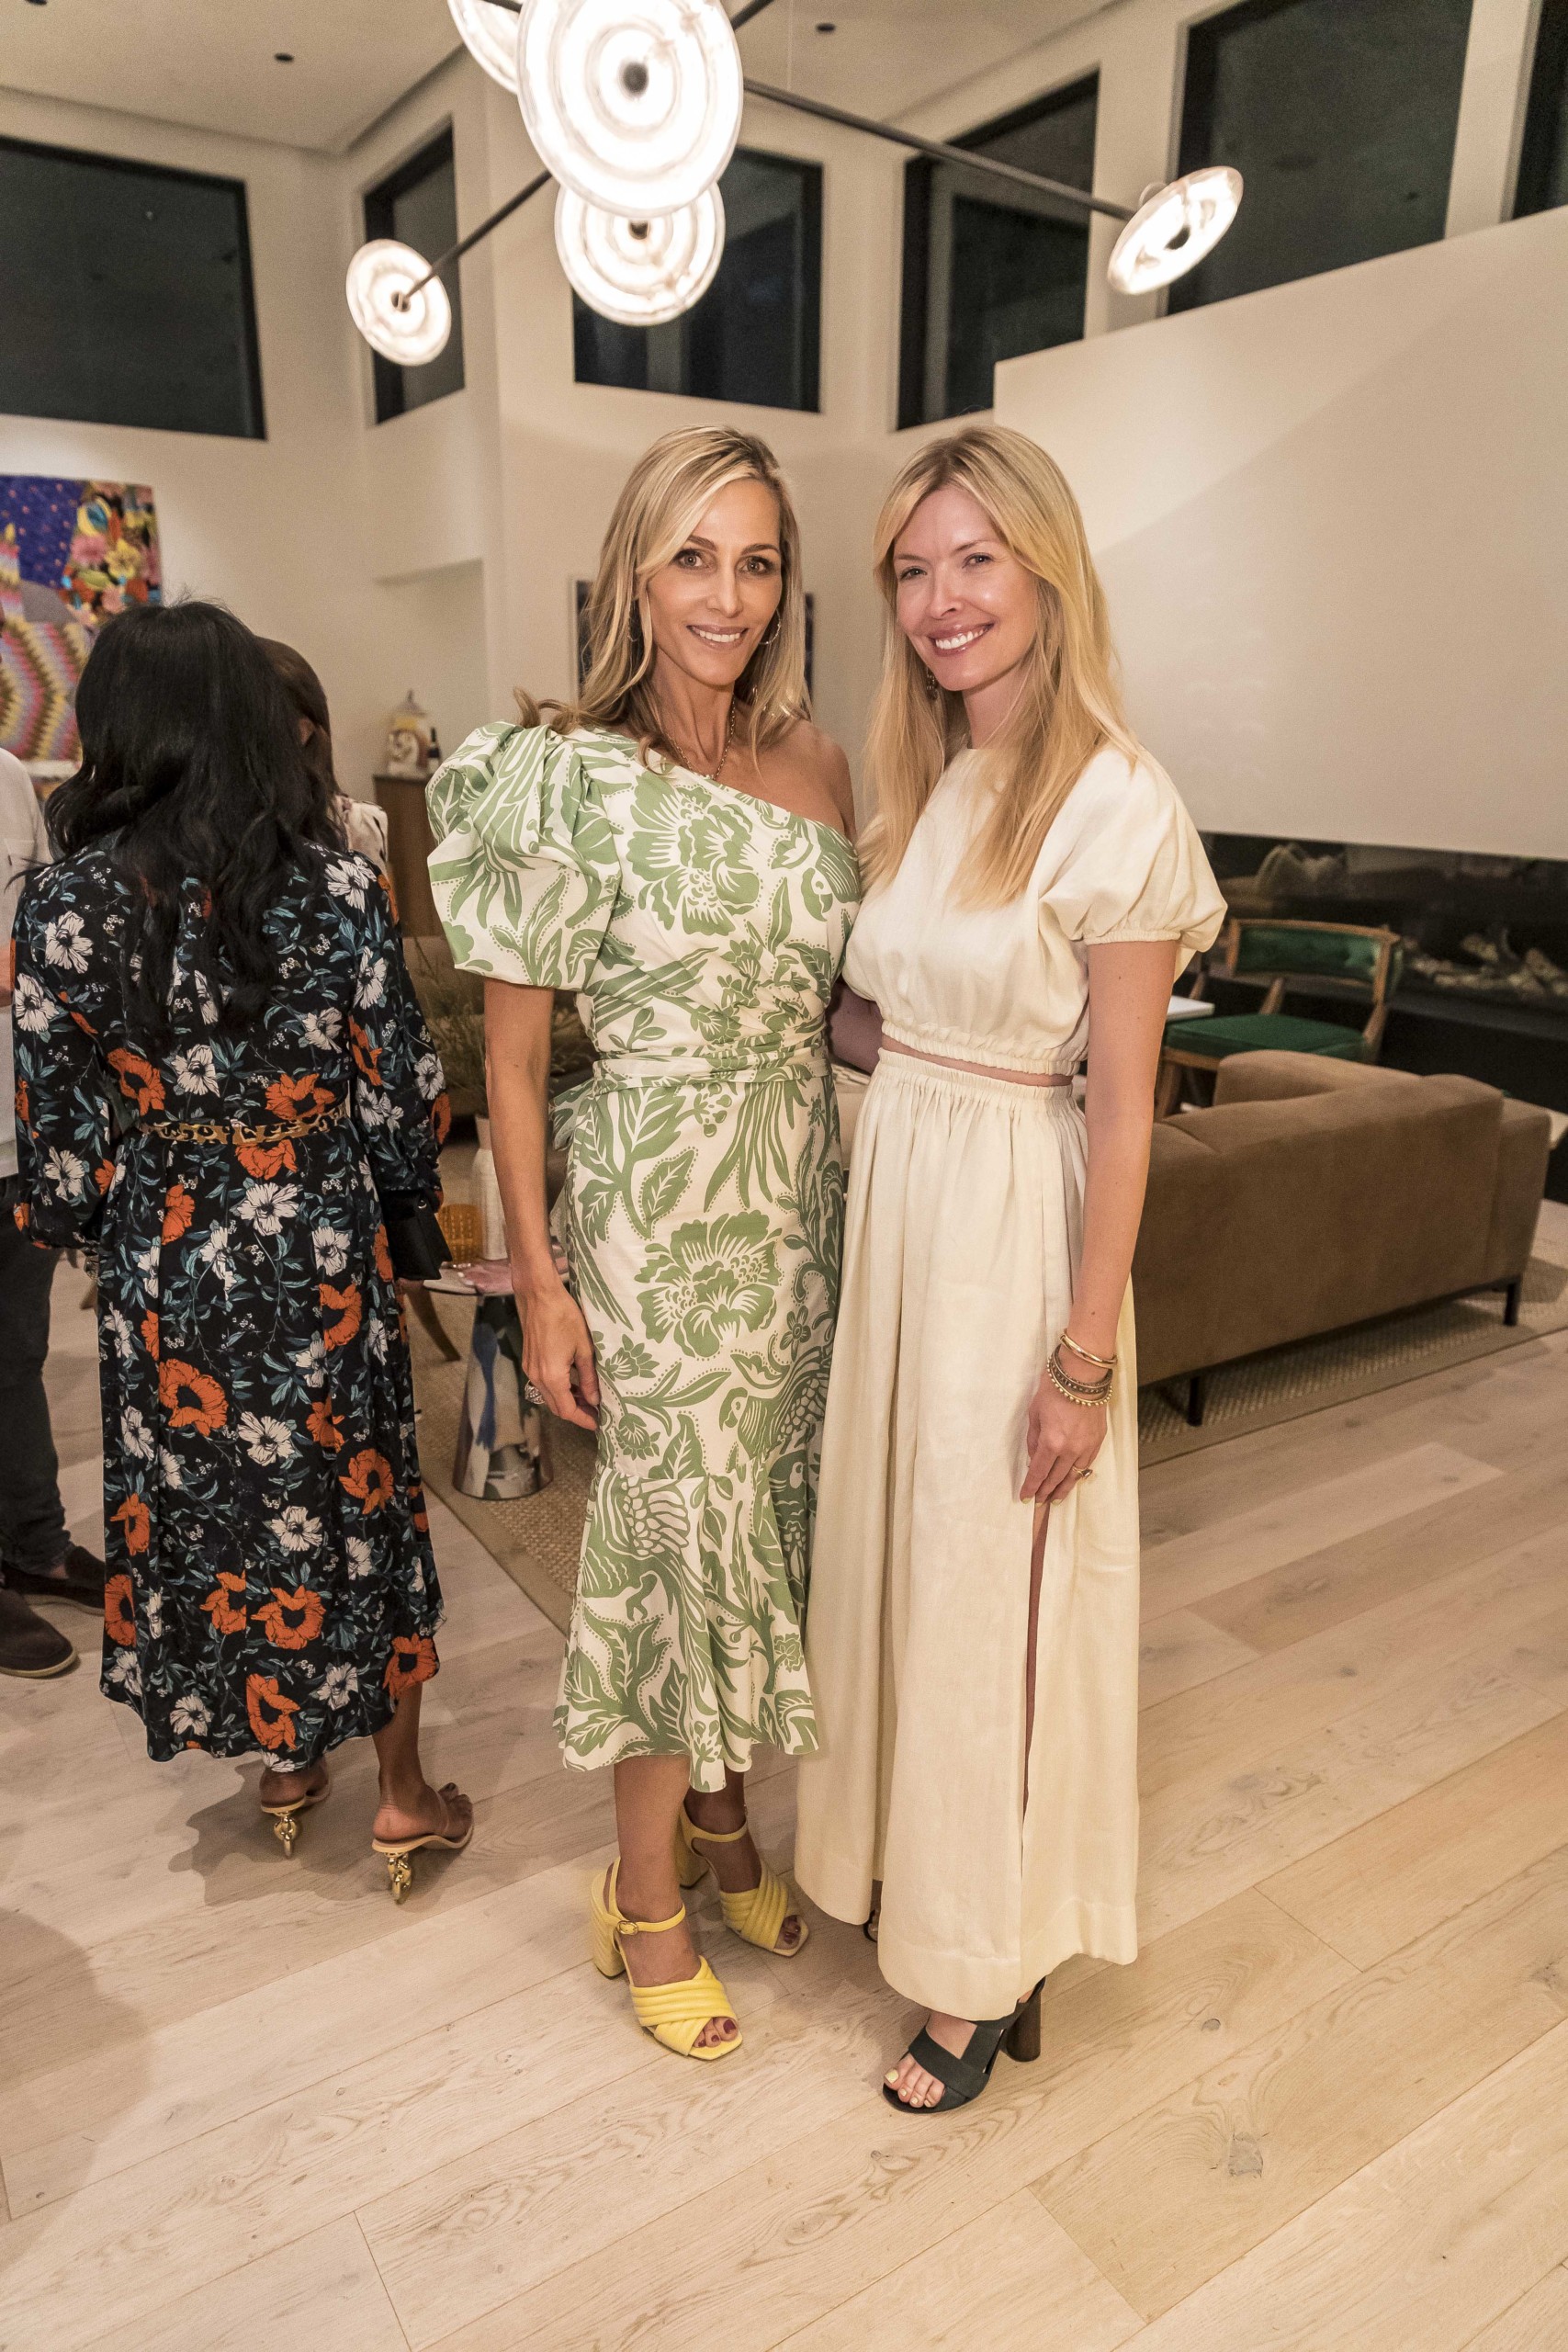 Jamie Tisch and Chandra Janway Johnson at a recent dinner celebrating Lehmann Maupin and Carpenters Workshop Gallery's Aspen pop-up.